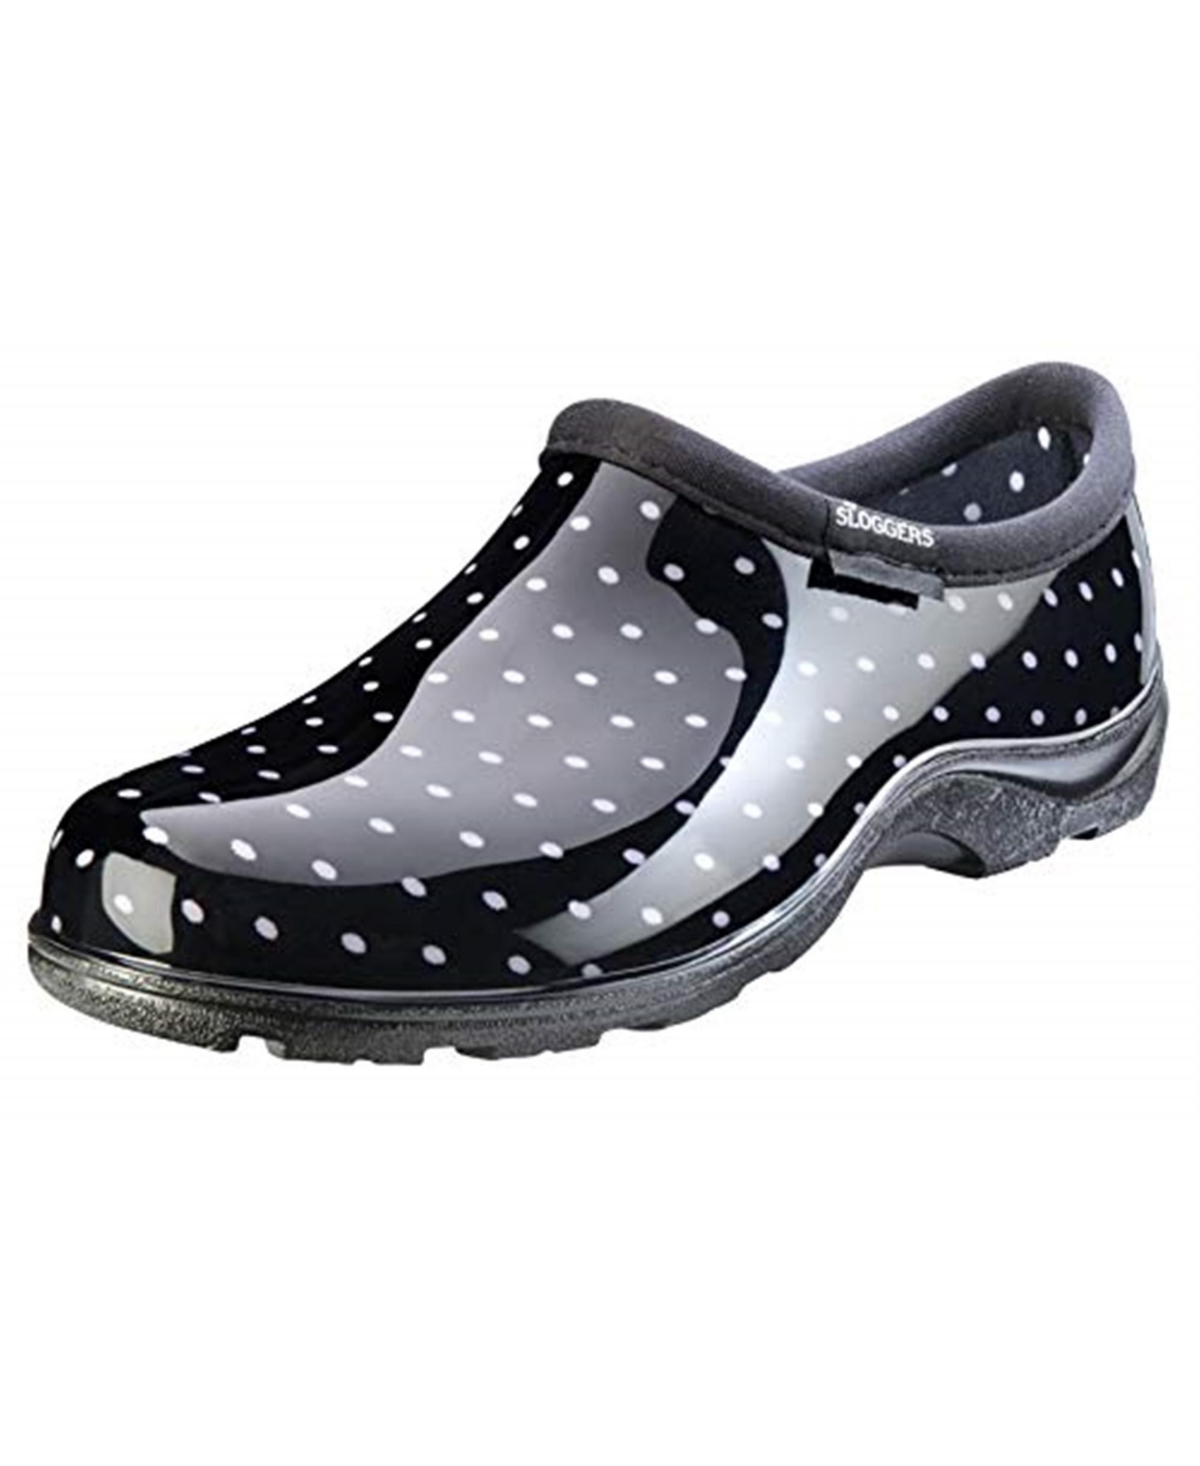 Sloggers Womens Rain And Garden Shoes, Black And White Polka-dots, Size 10 In Multi